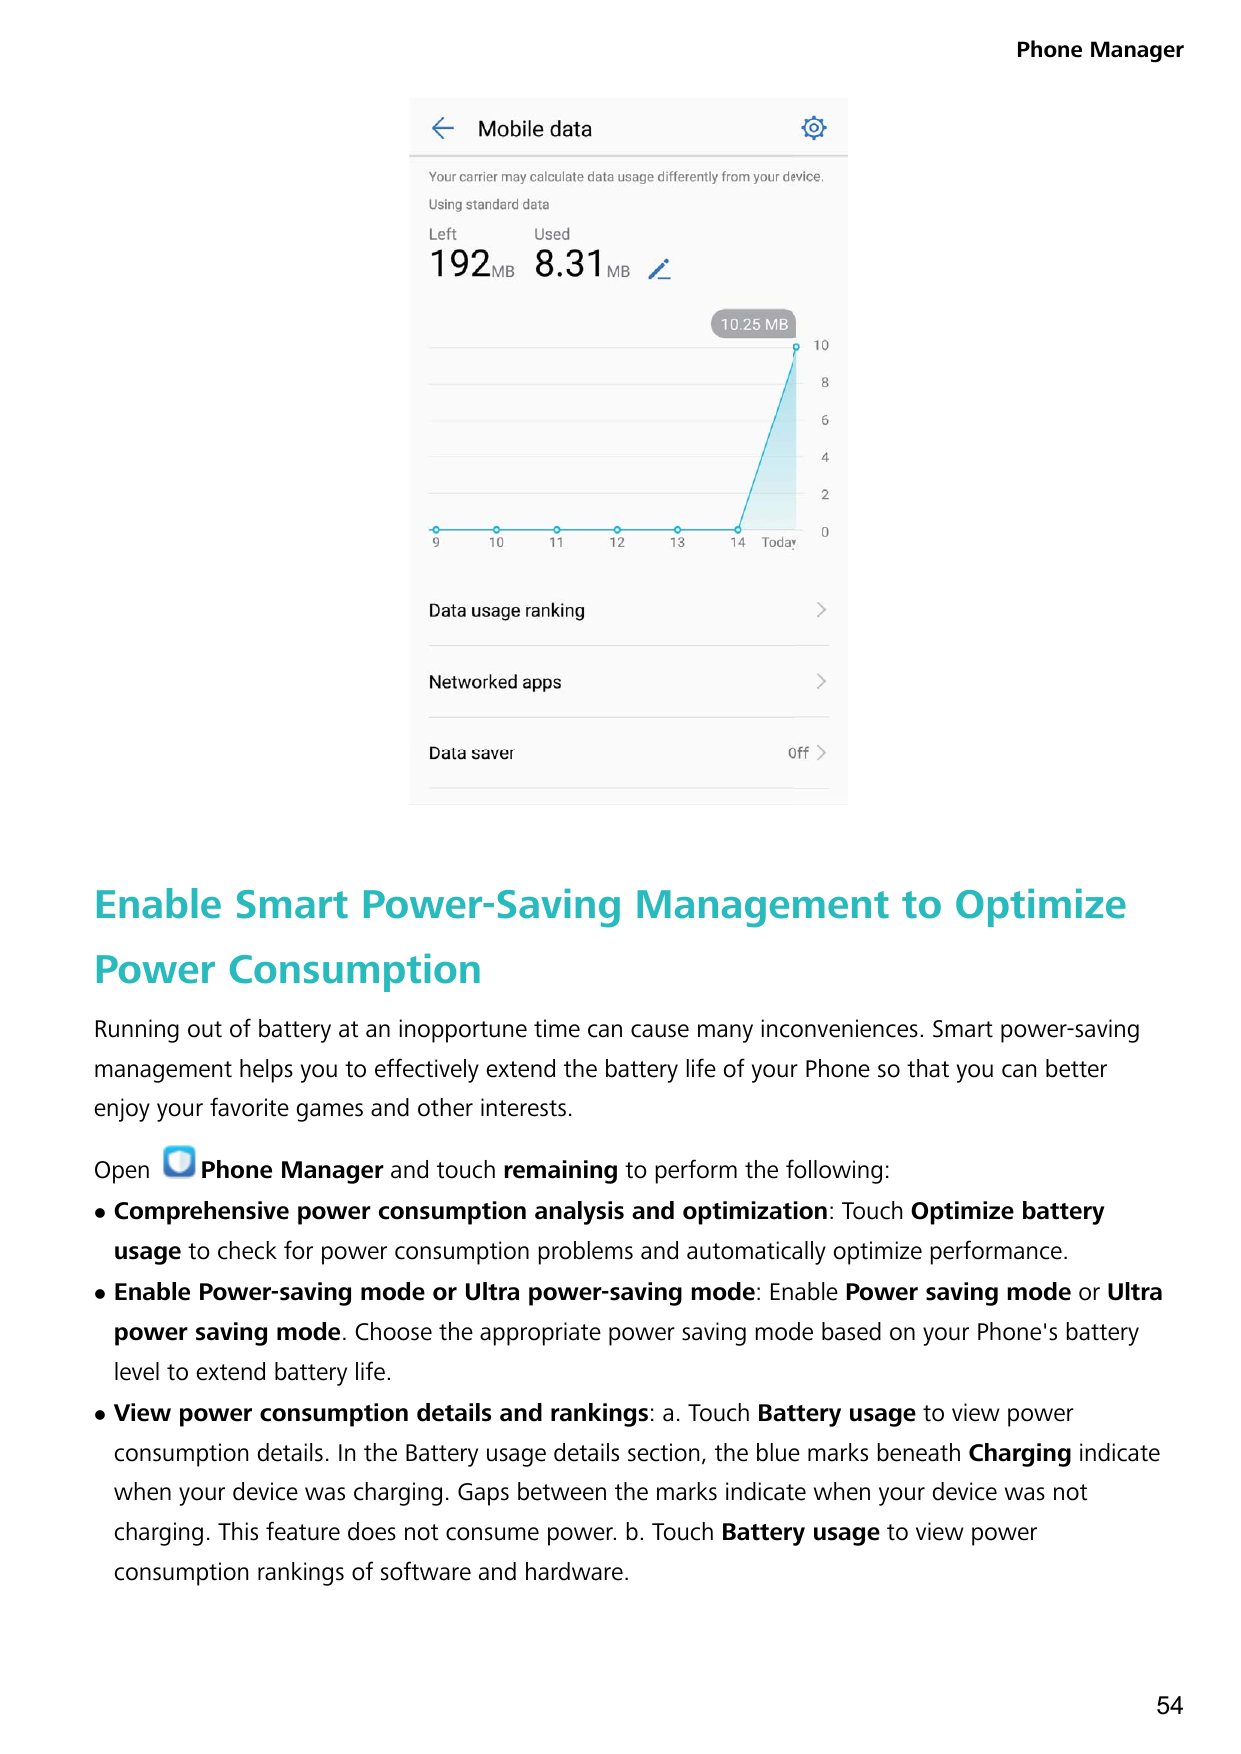 Phone ManagerEnable Smart Power-Saving Management to OptimizePower ConsumptionRunning out of battery at an inopportune time can 